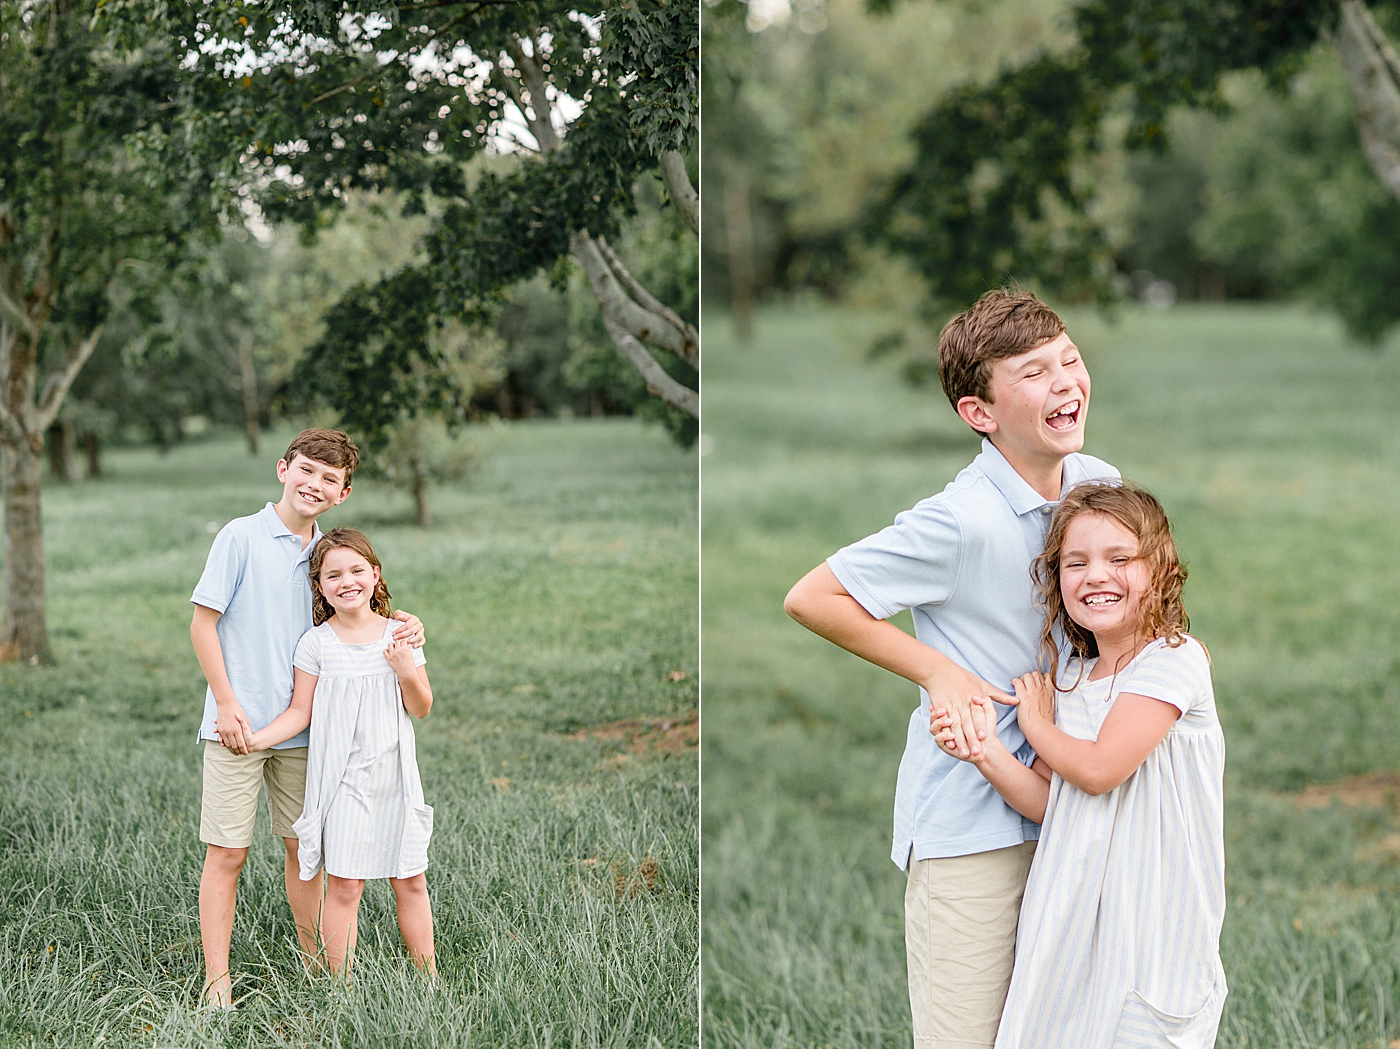 Sibling photos during family session in South Tampa with Brittany Elise Photography.